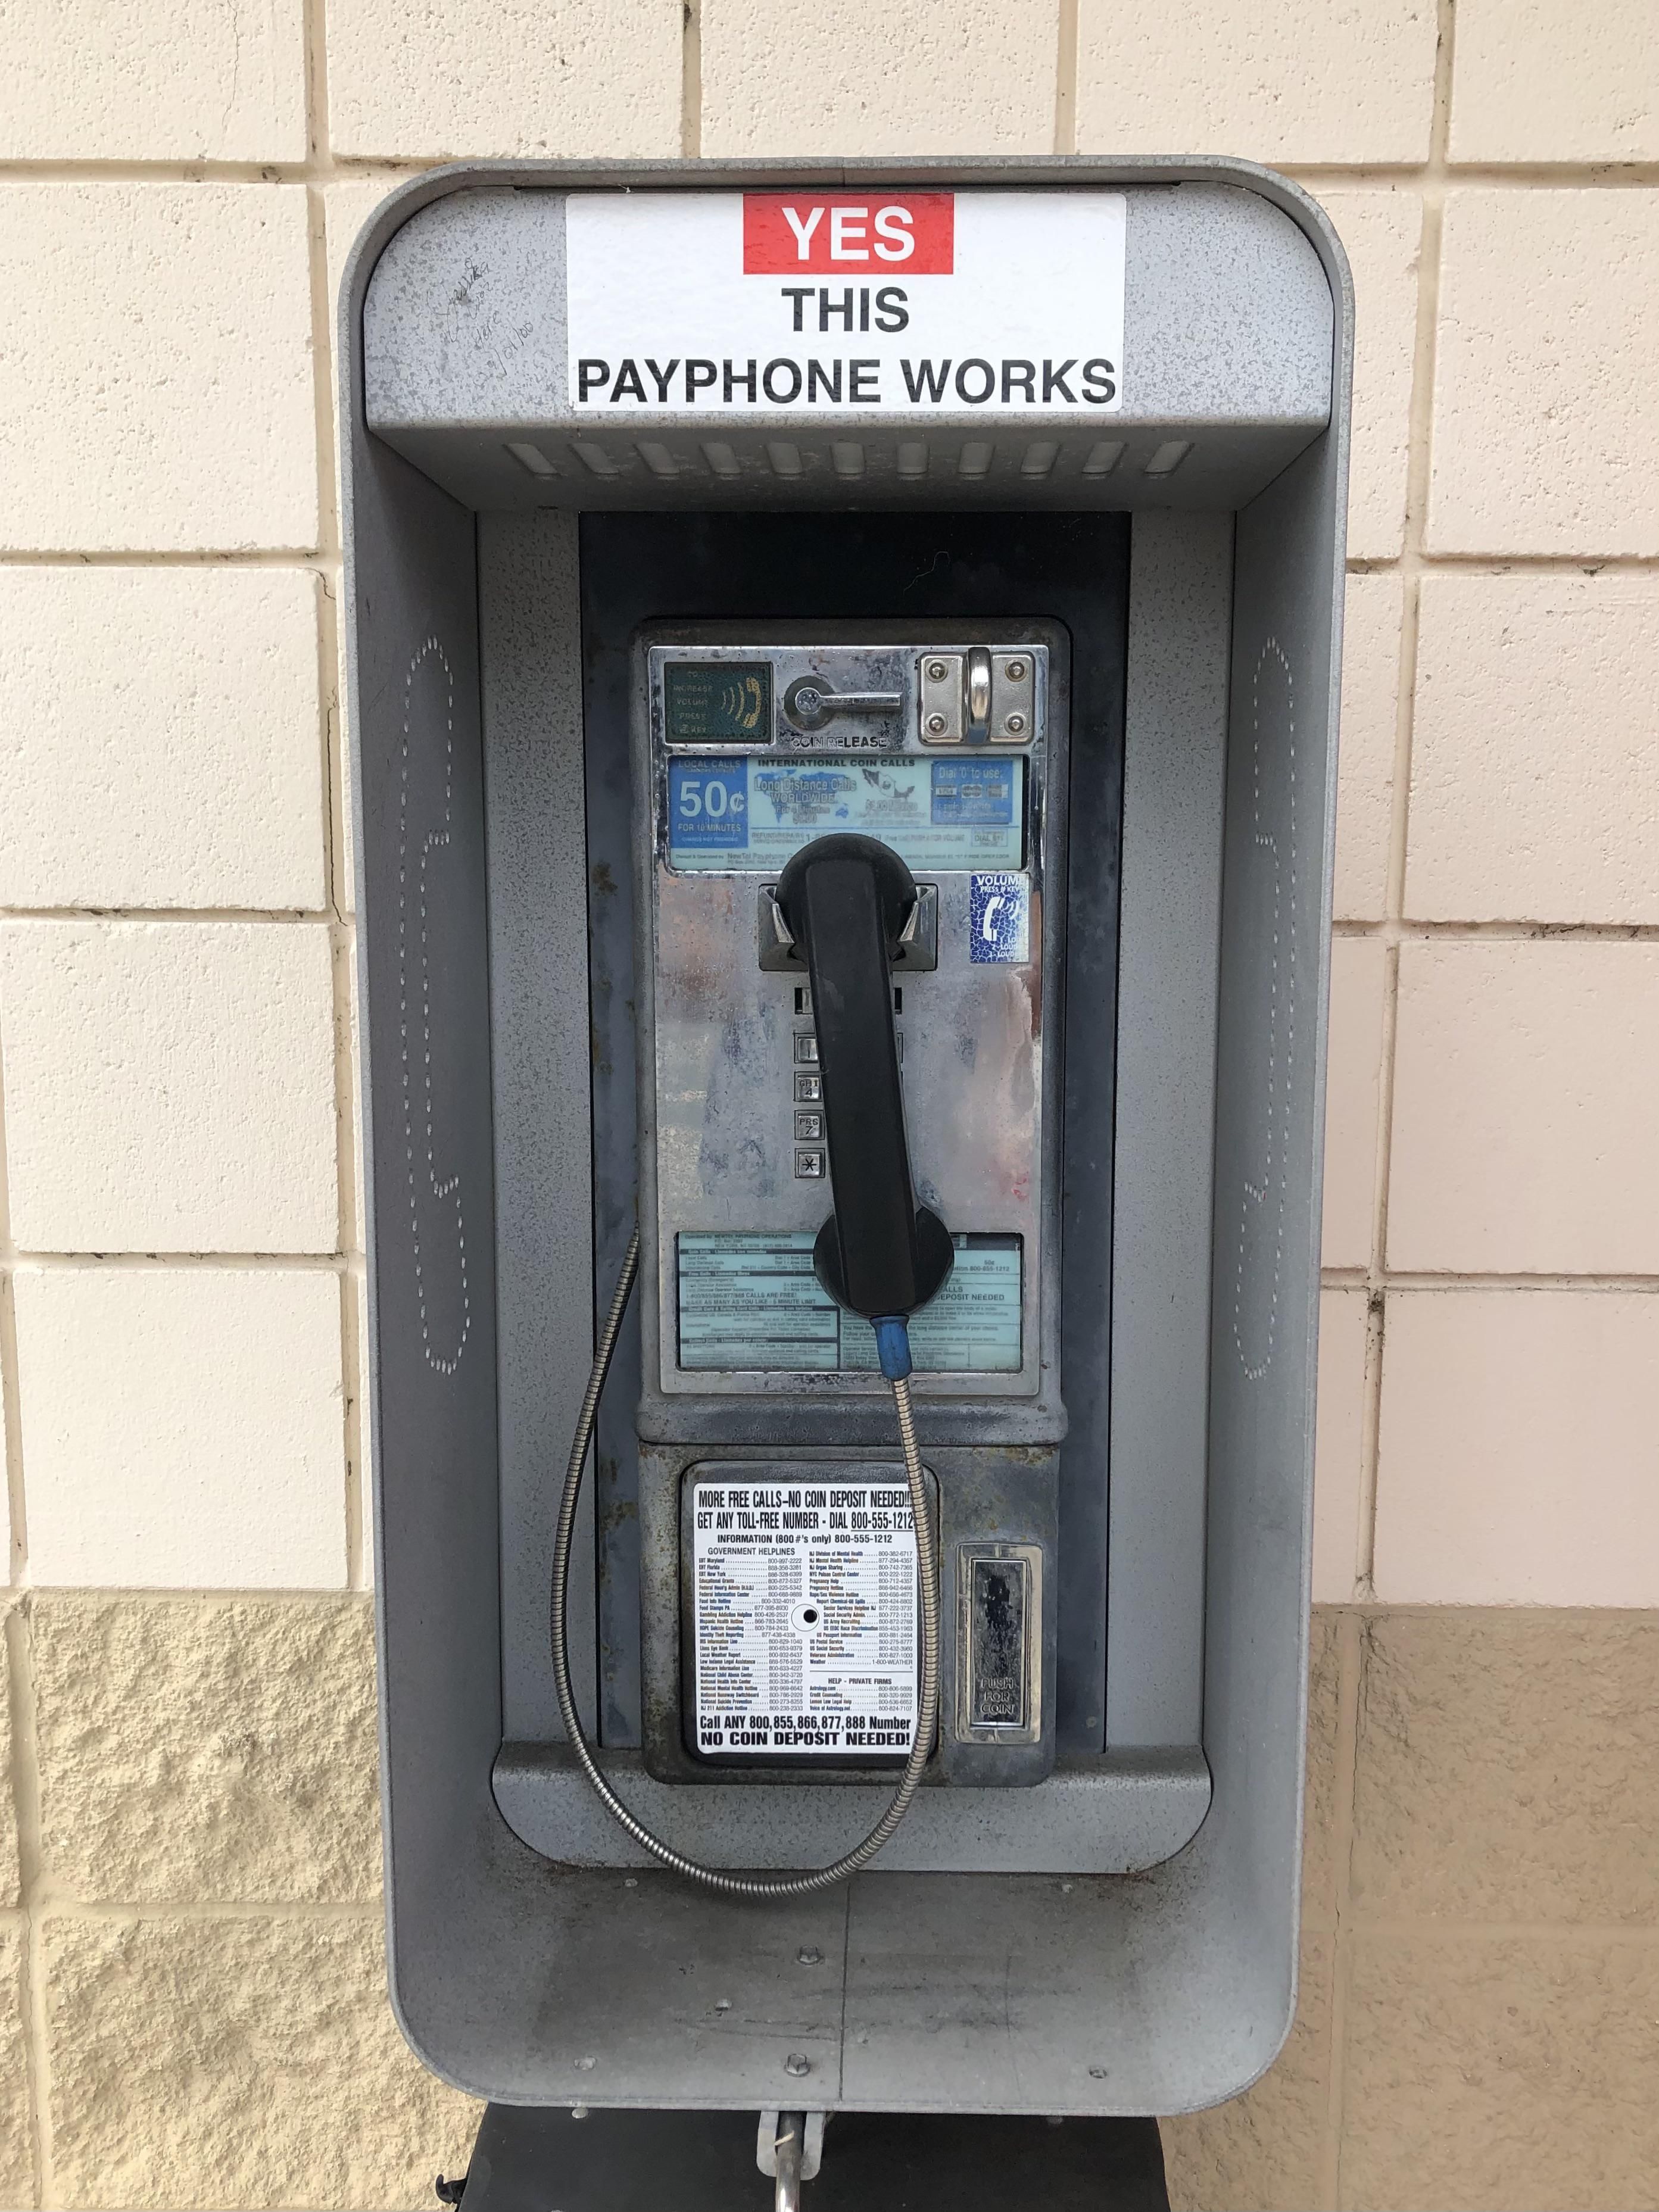 Yes, this payphone works.